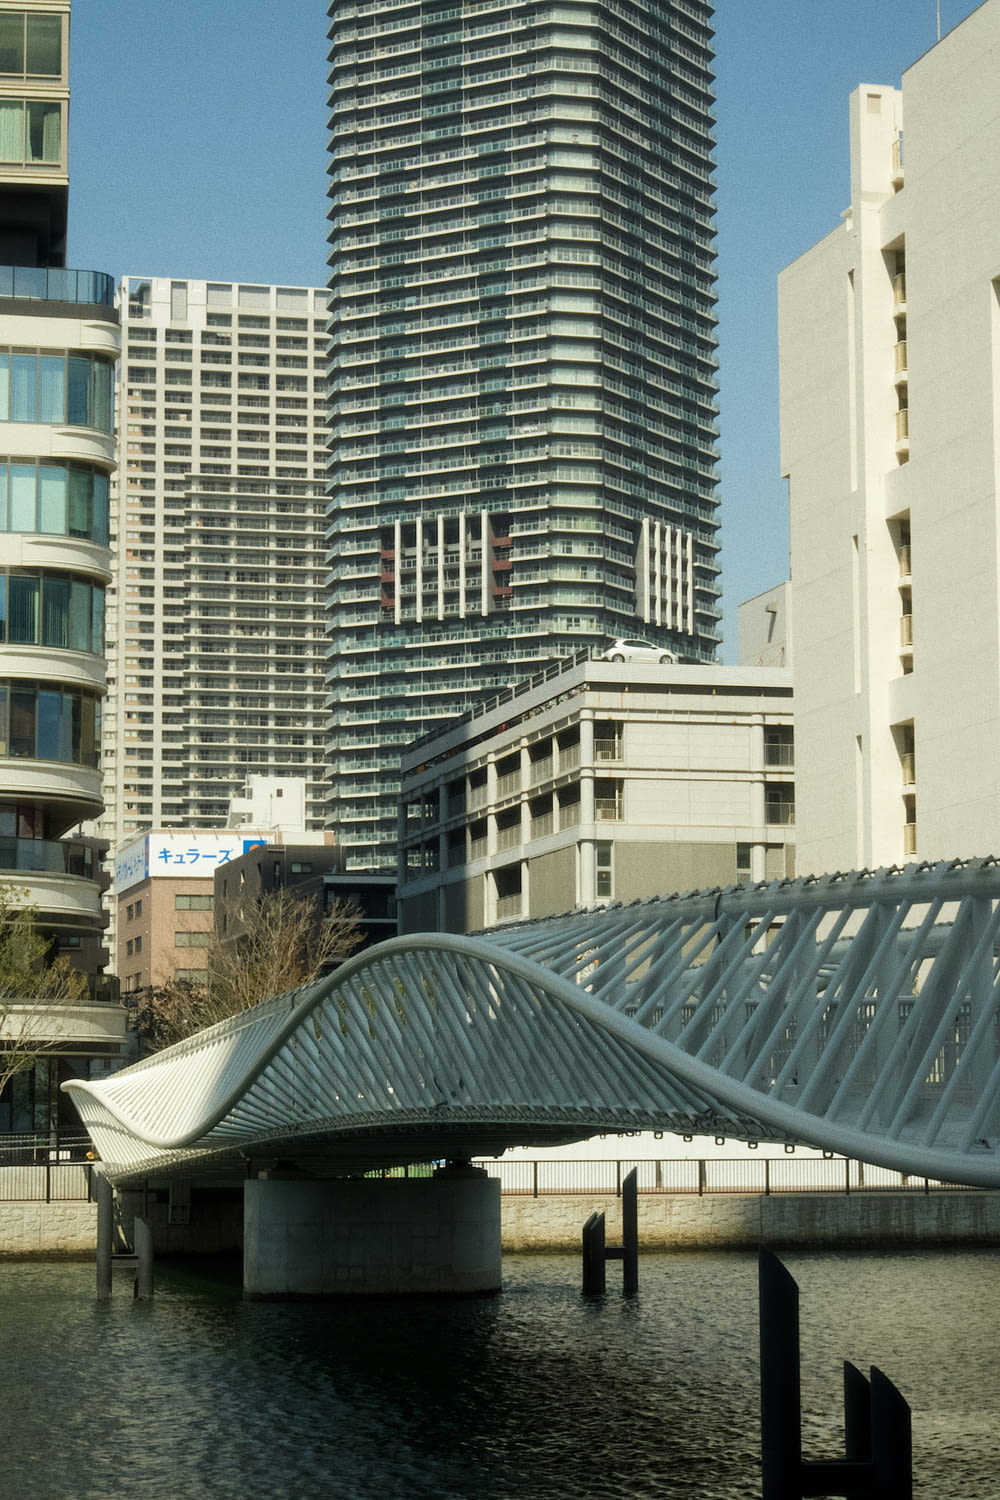 a bridge over a body of water in front of tall buildings